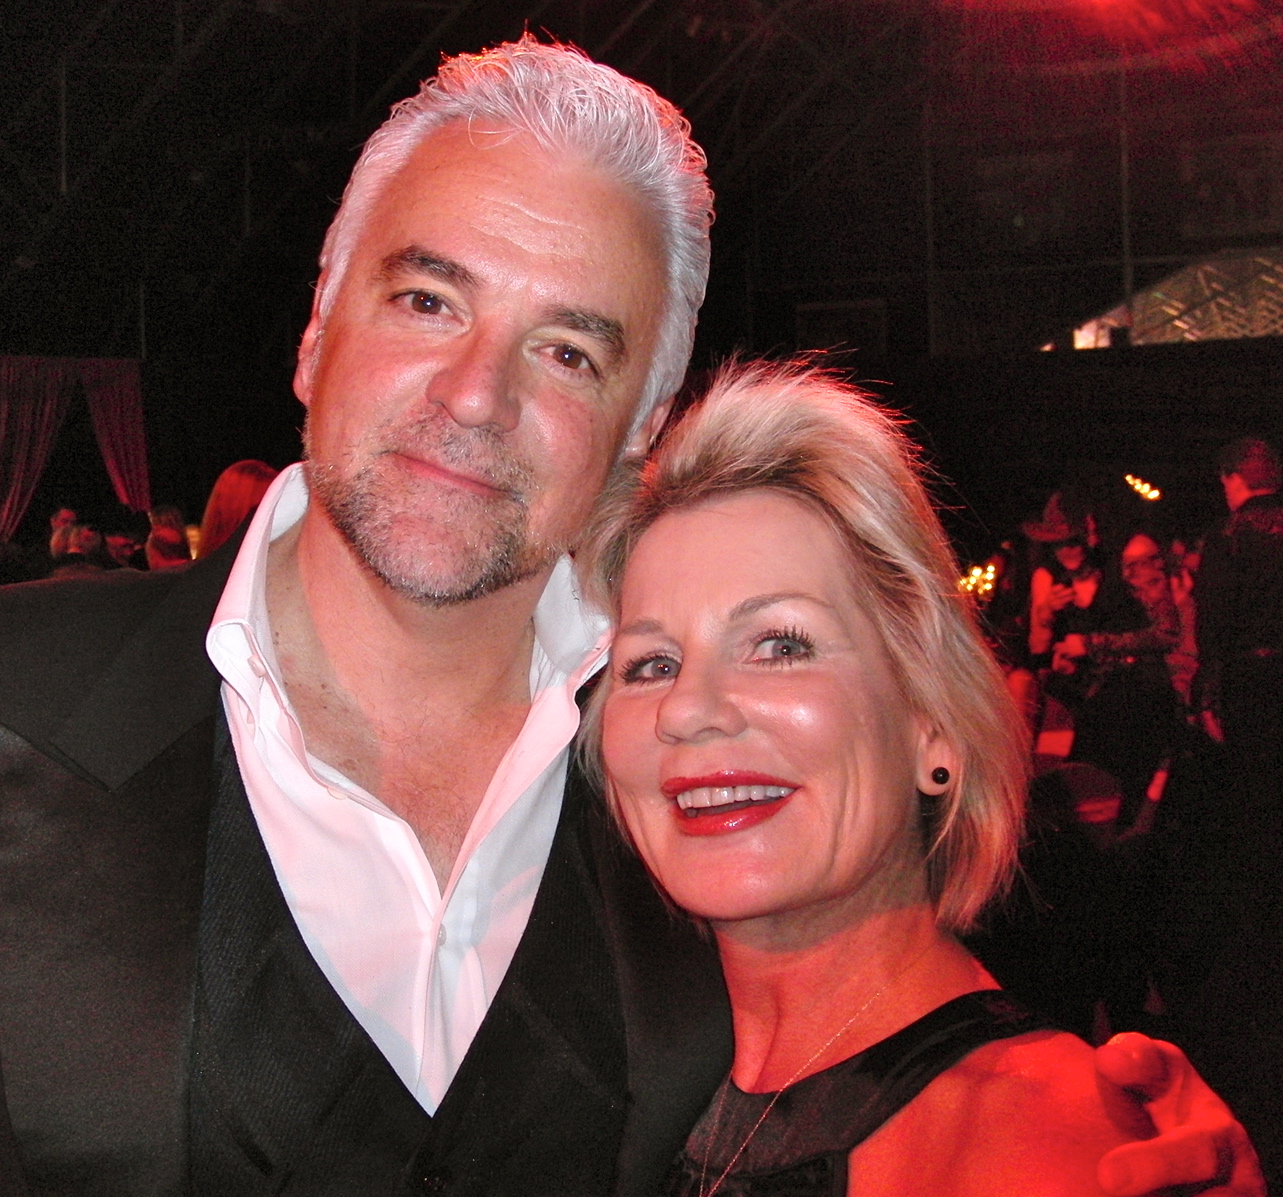 John O'Hurley and Kandra King raising money for the fabulous charity: CHILDHELP (Prevention & Treatment of Child Abuse).